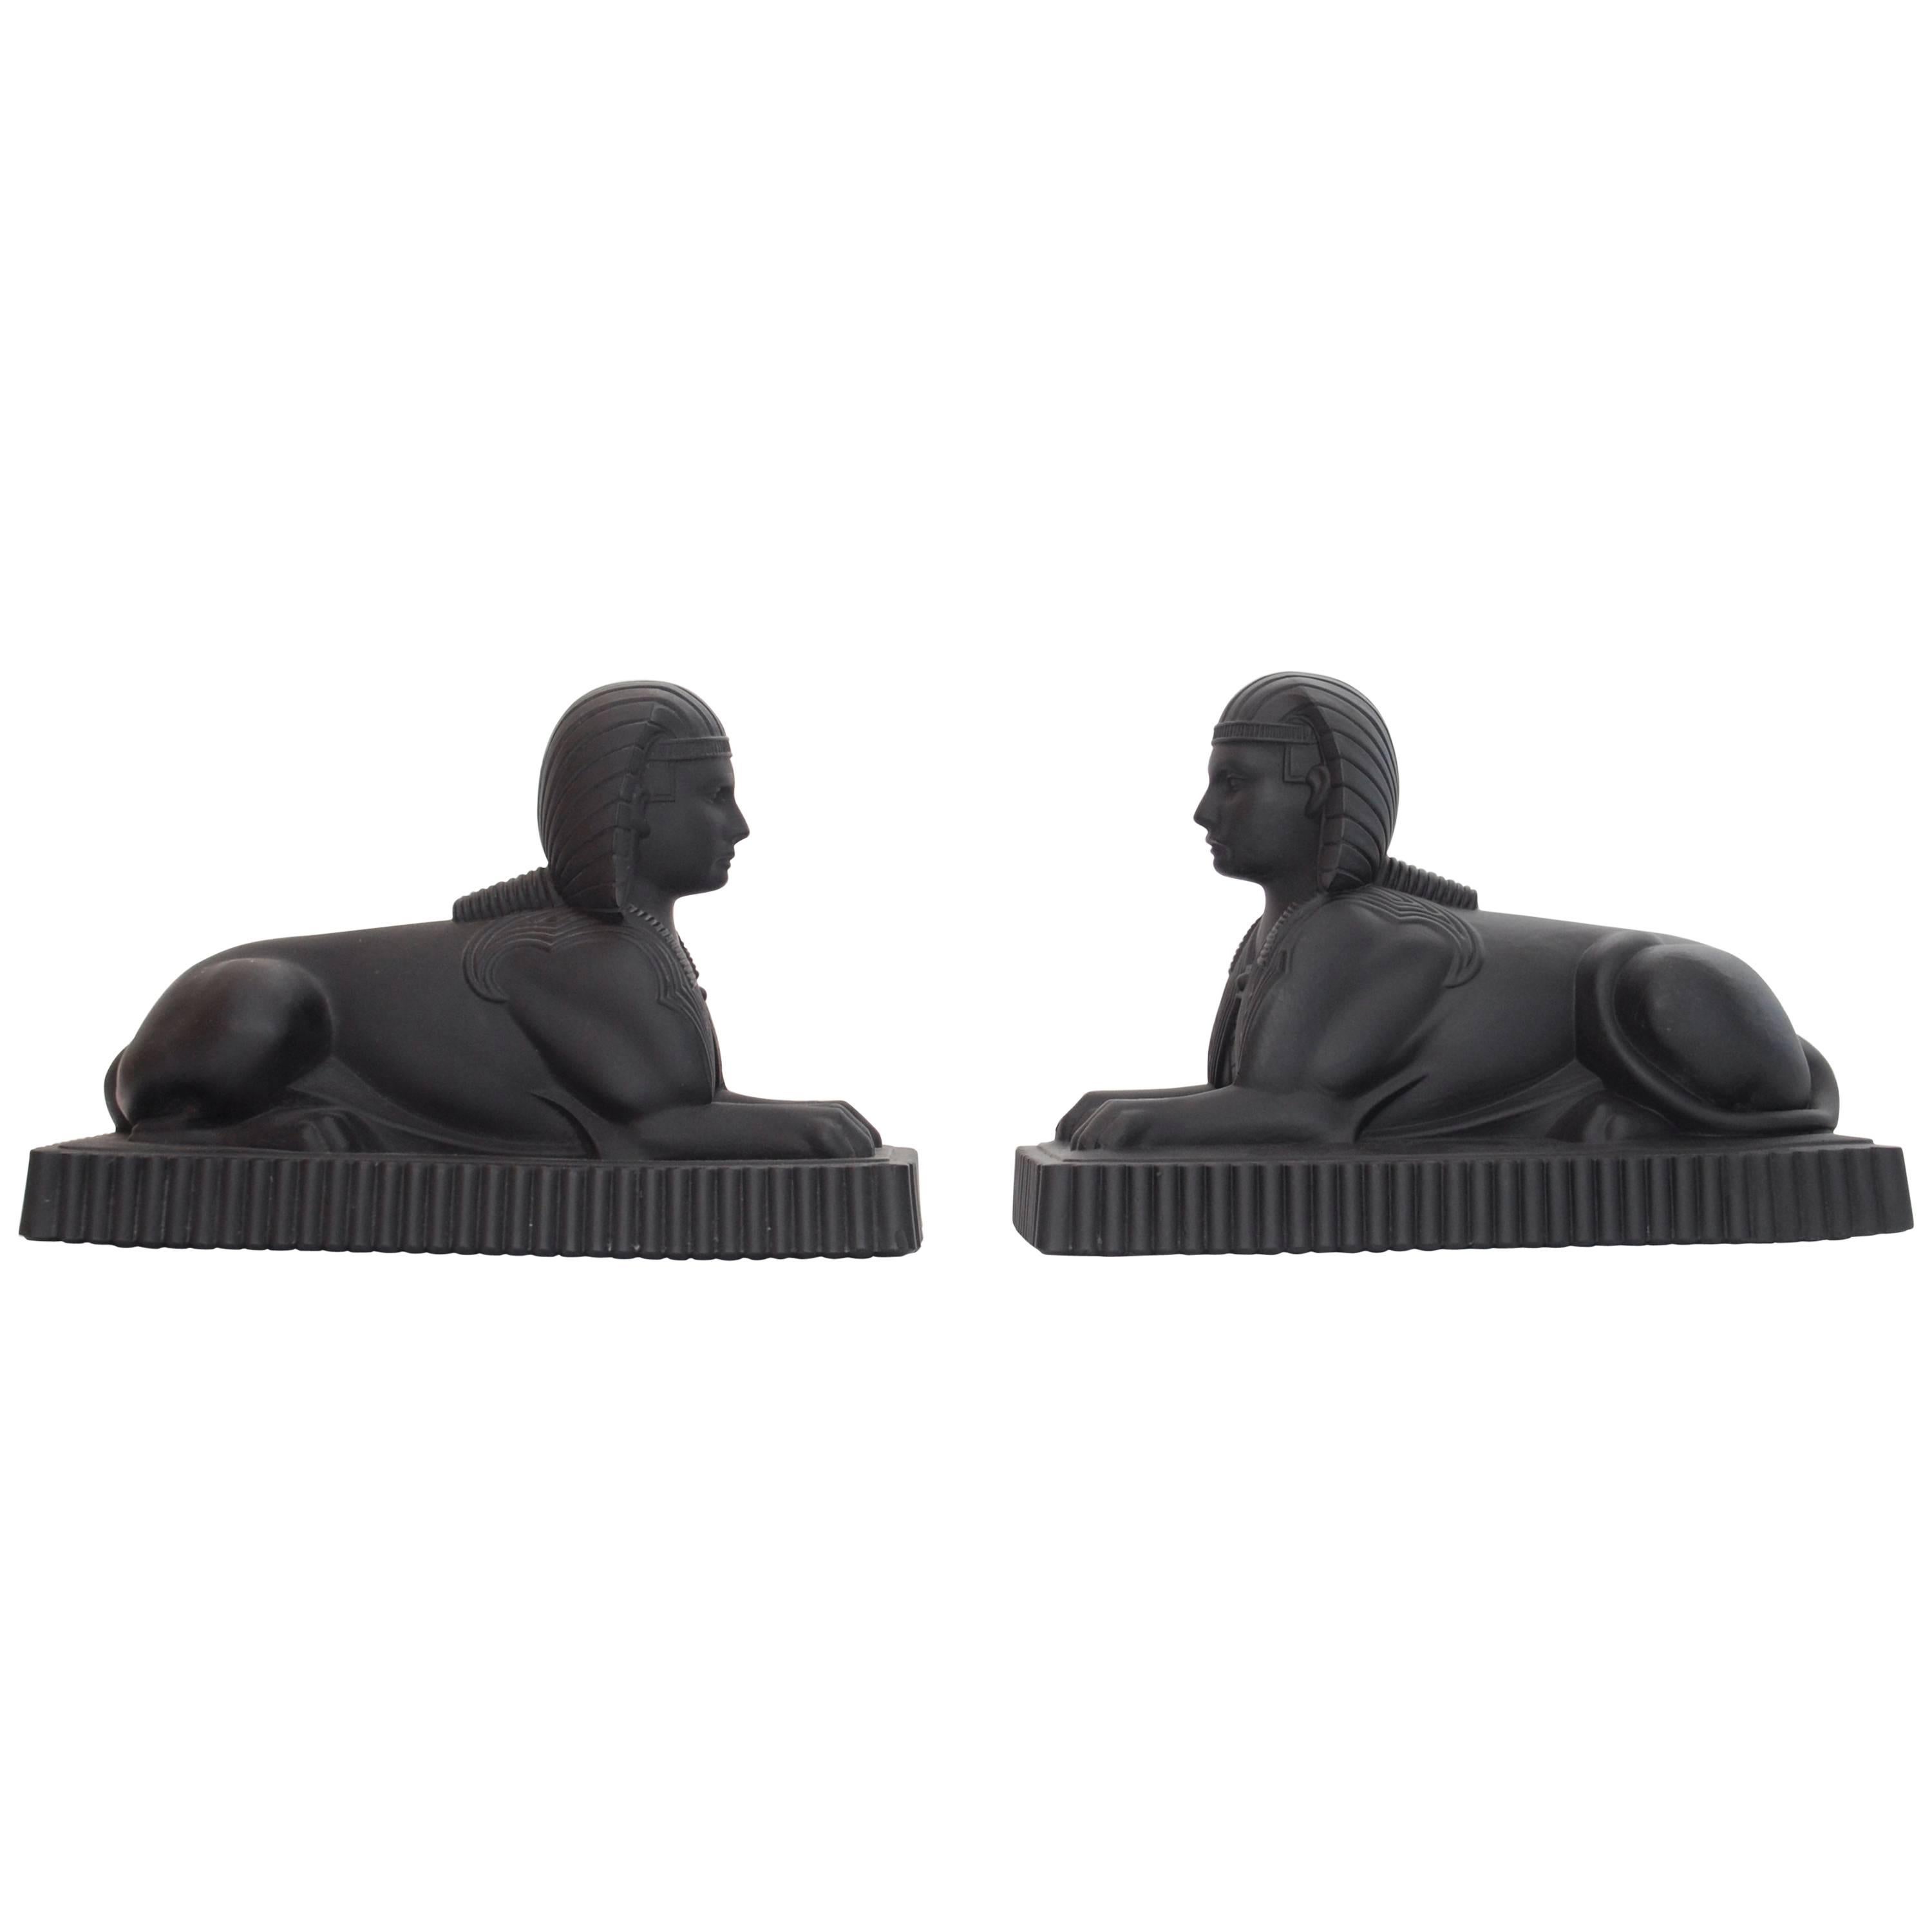 Pair of Black Glass Sphinxes, Molineaux & Webb, circa 1875